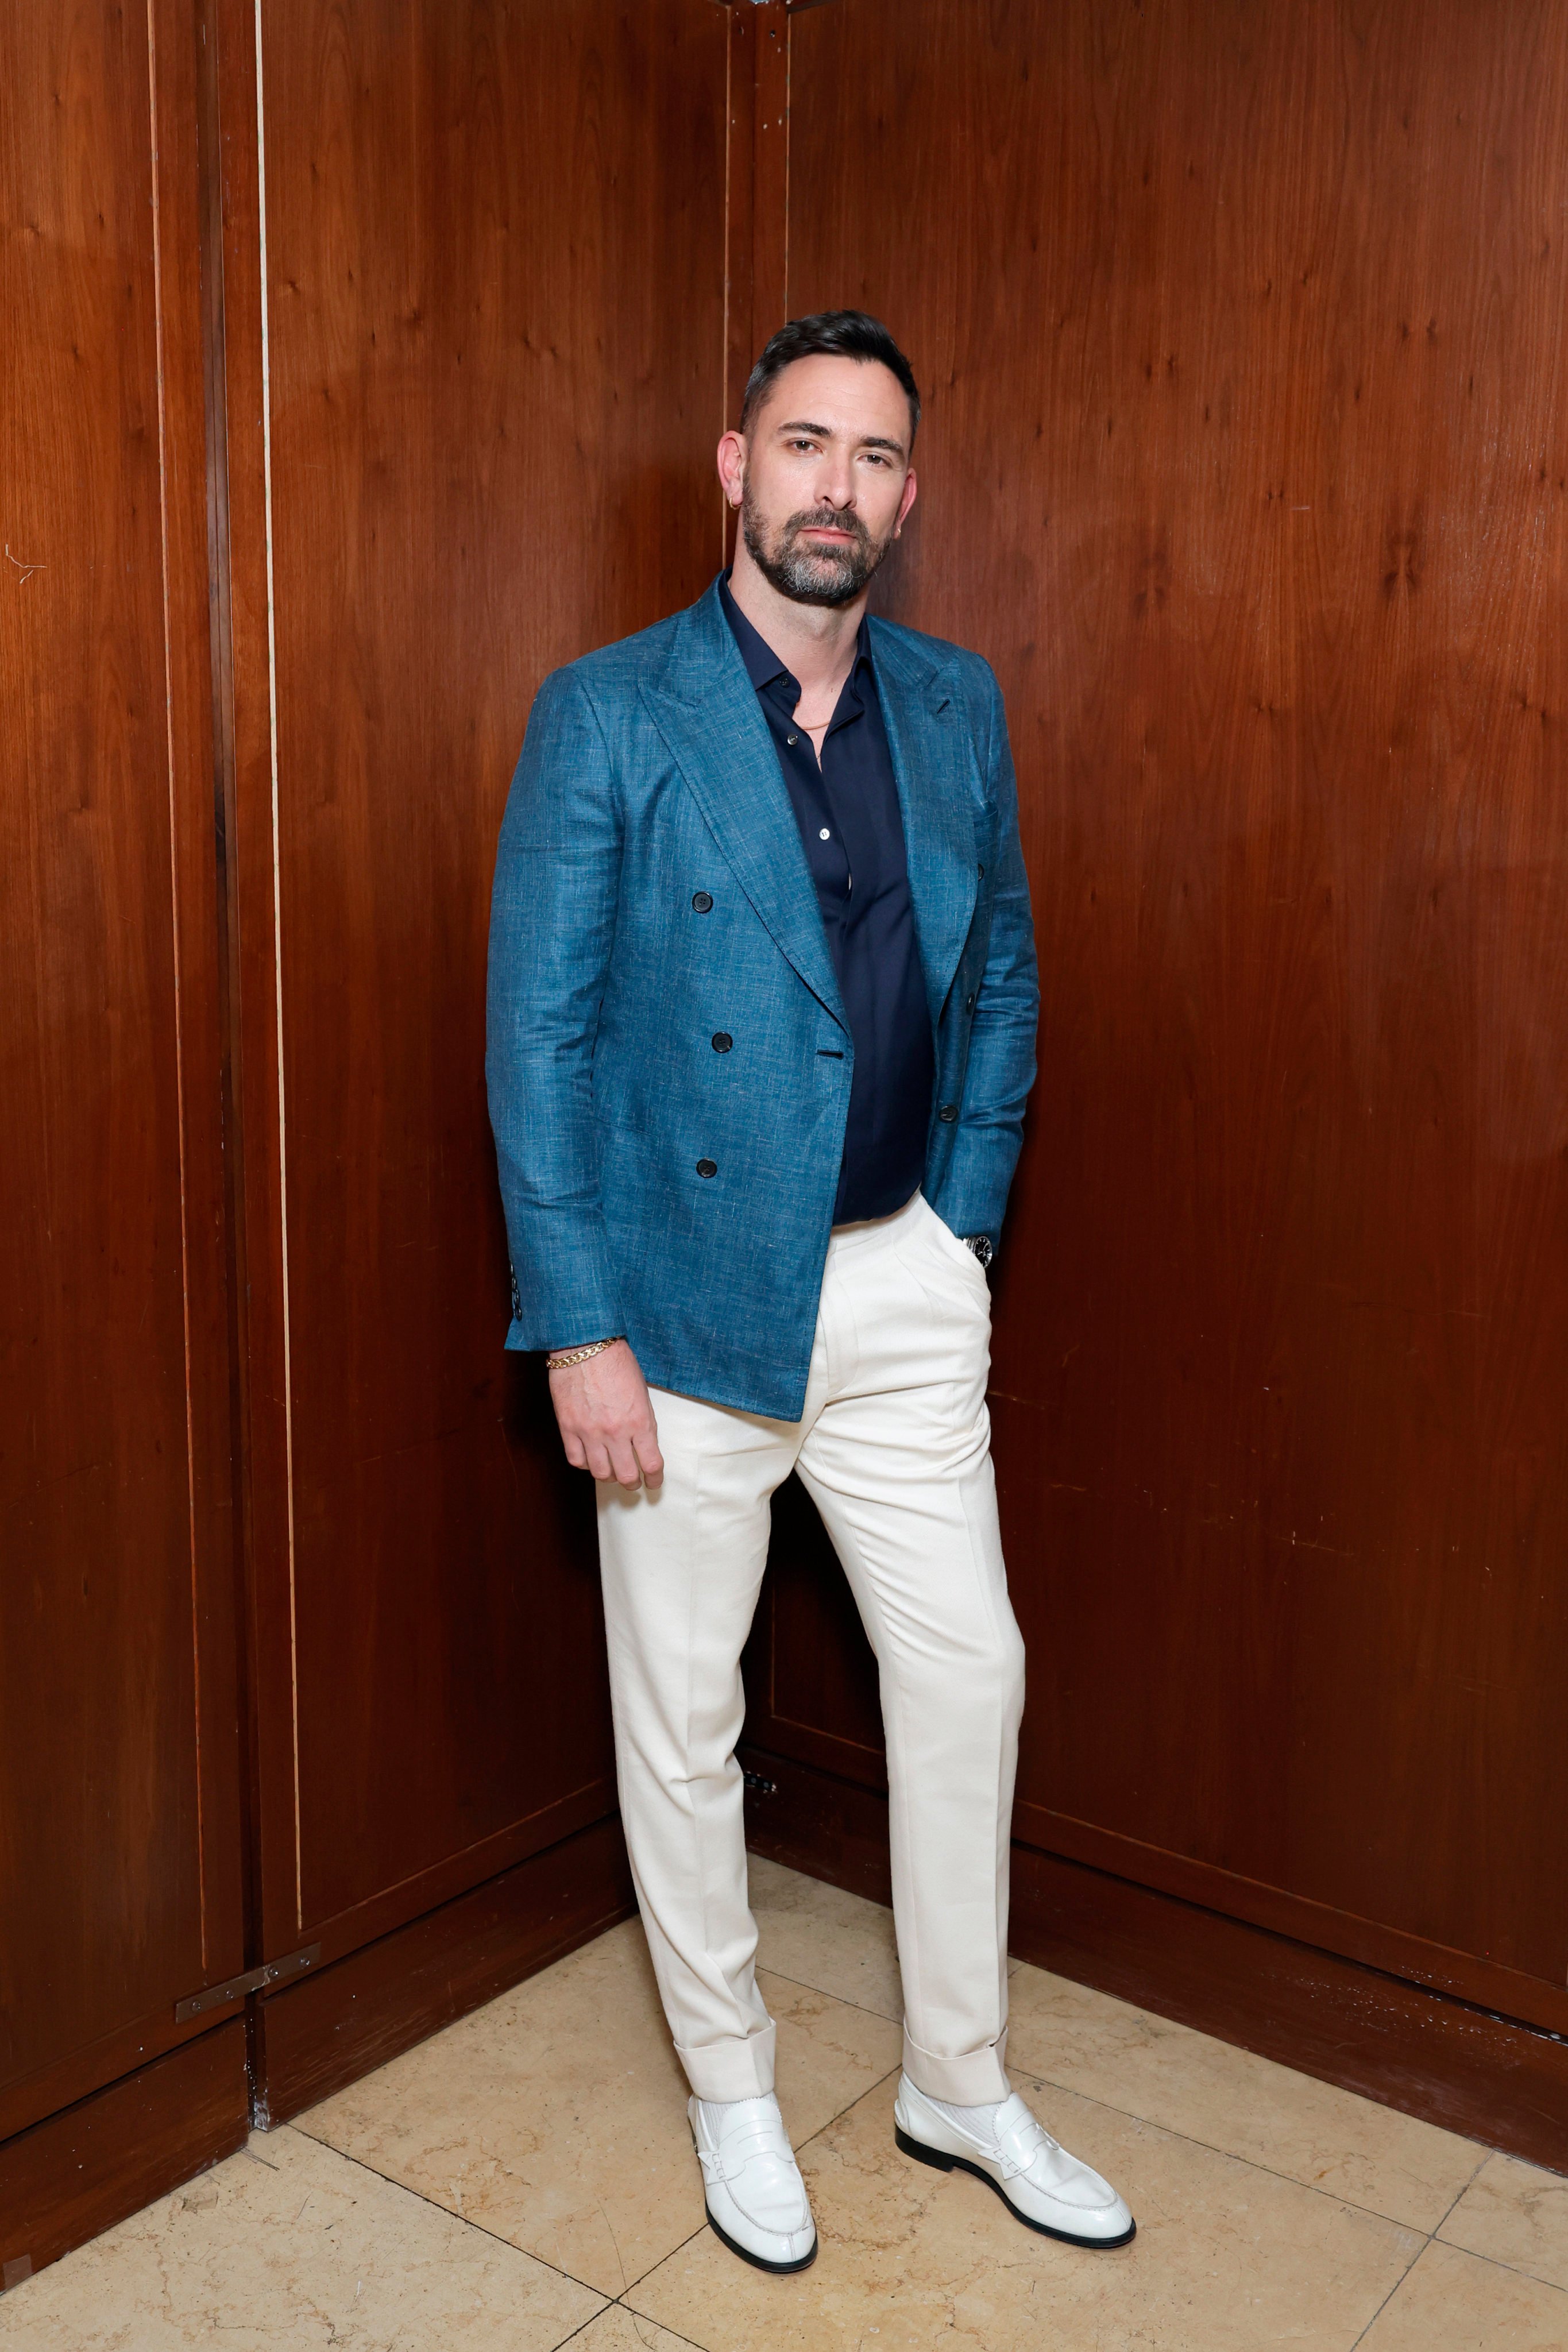 Celebrity menswear stylist Alfie Baker clearly dresses himself just as sharply as his A-list clients. Photo: The Hollywood Reporter via Getty Images